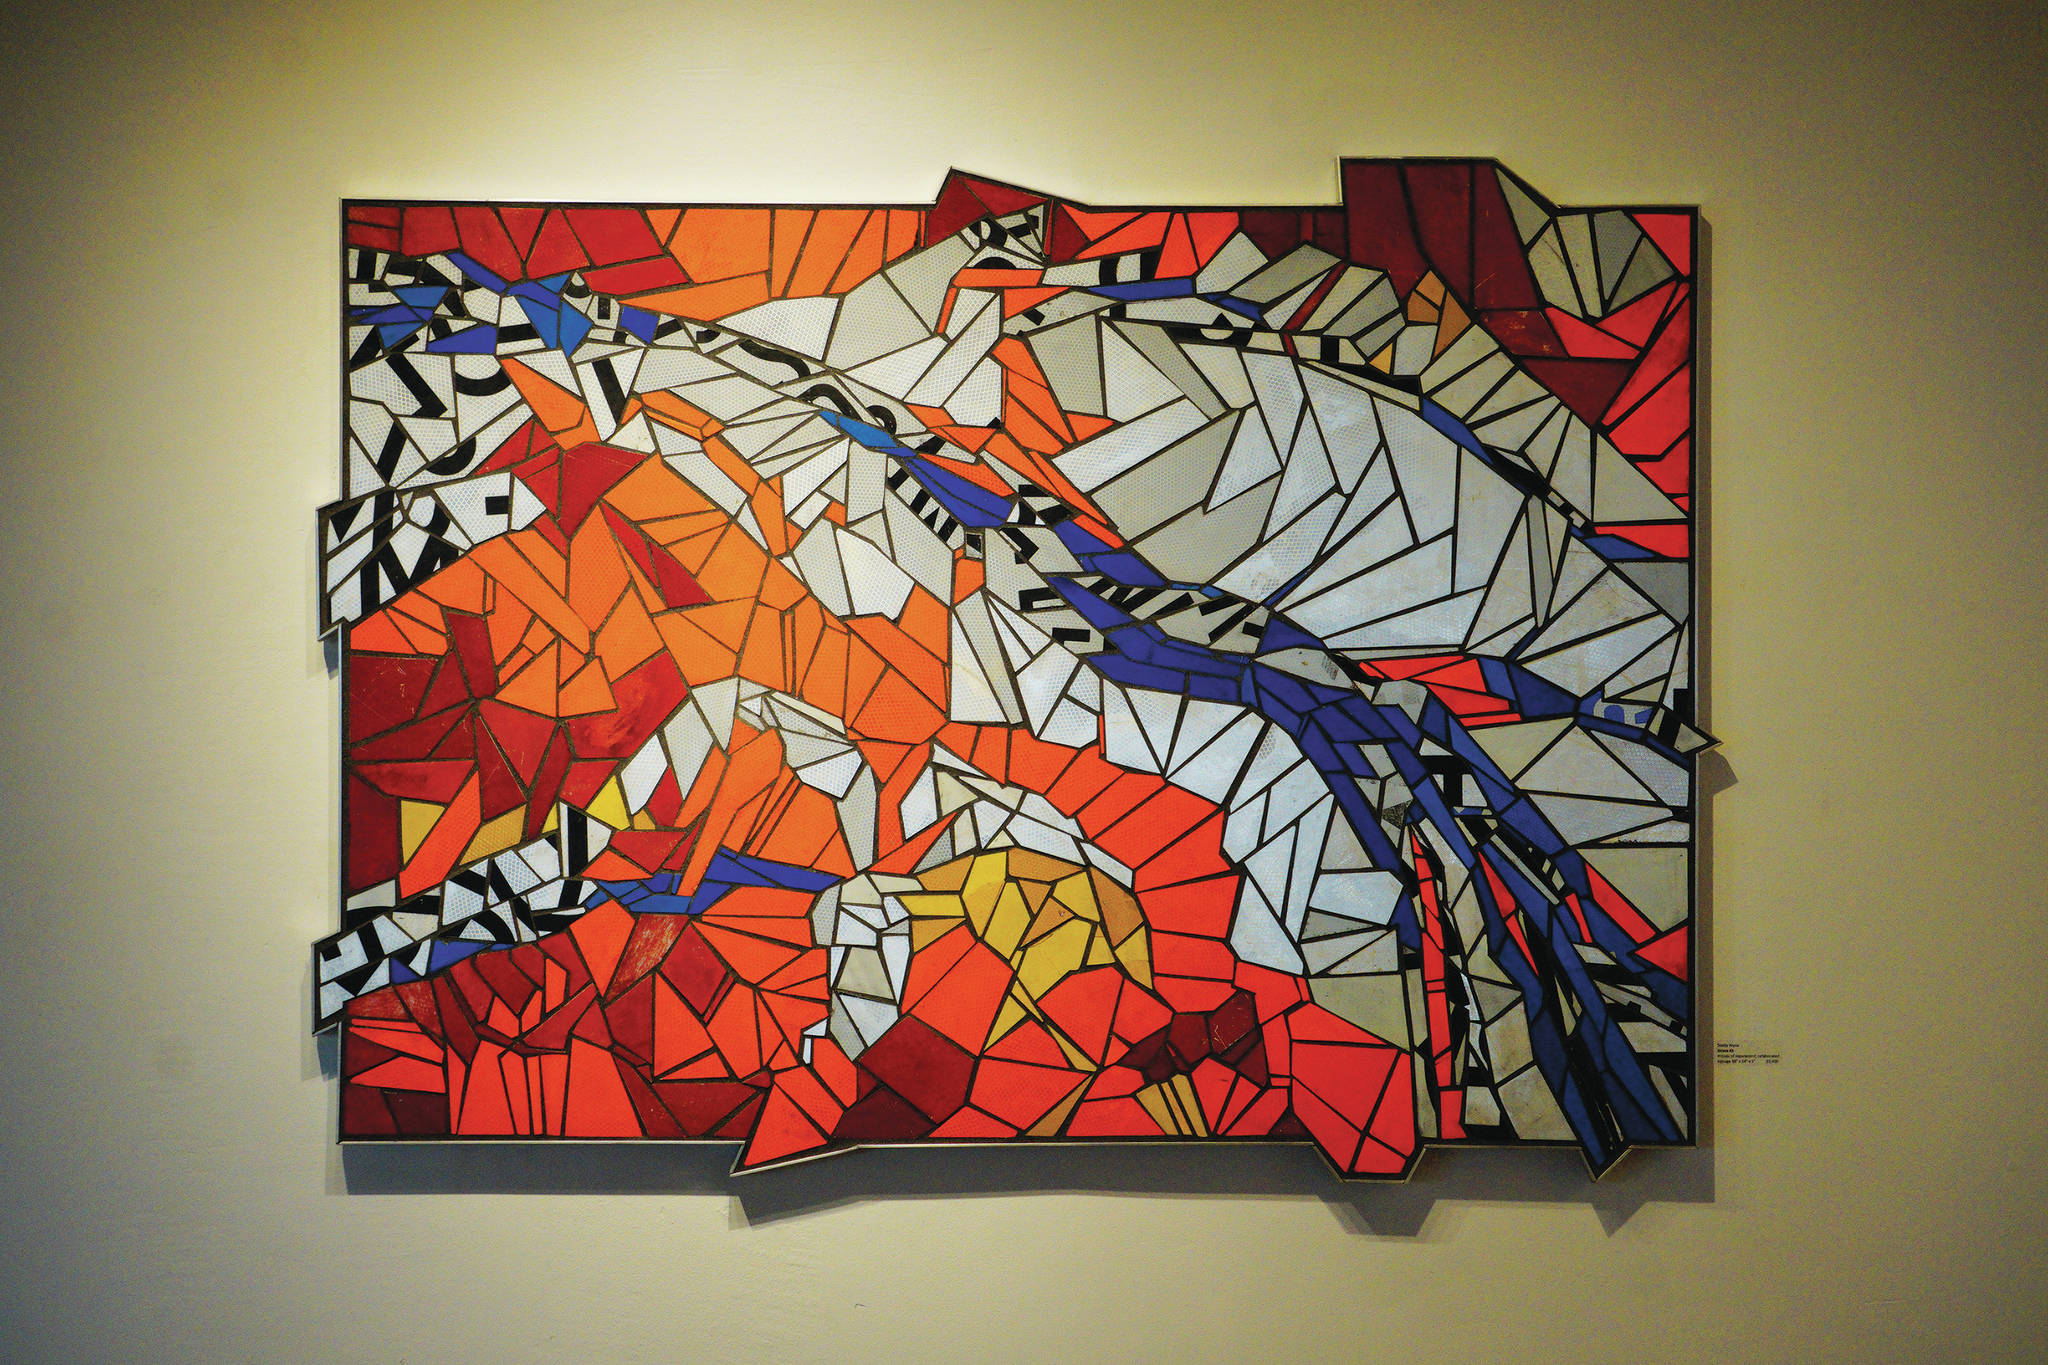 Sheila Wyne’s “Strata #3” is part of her show that opened Friday, Aug. 6, 2021, at Bunnell Street Arts Center. (Photo by Michael Armstrong/Homer News)